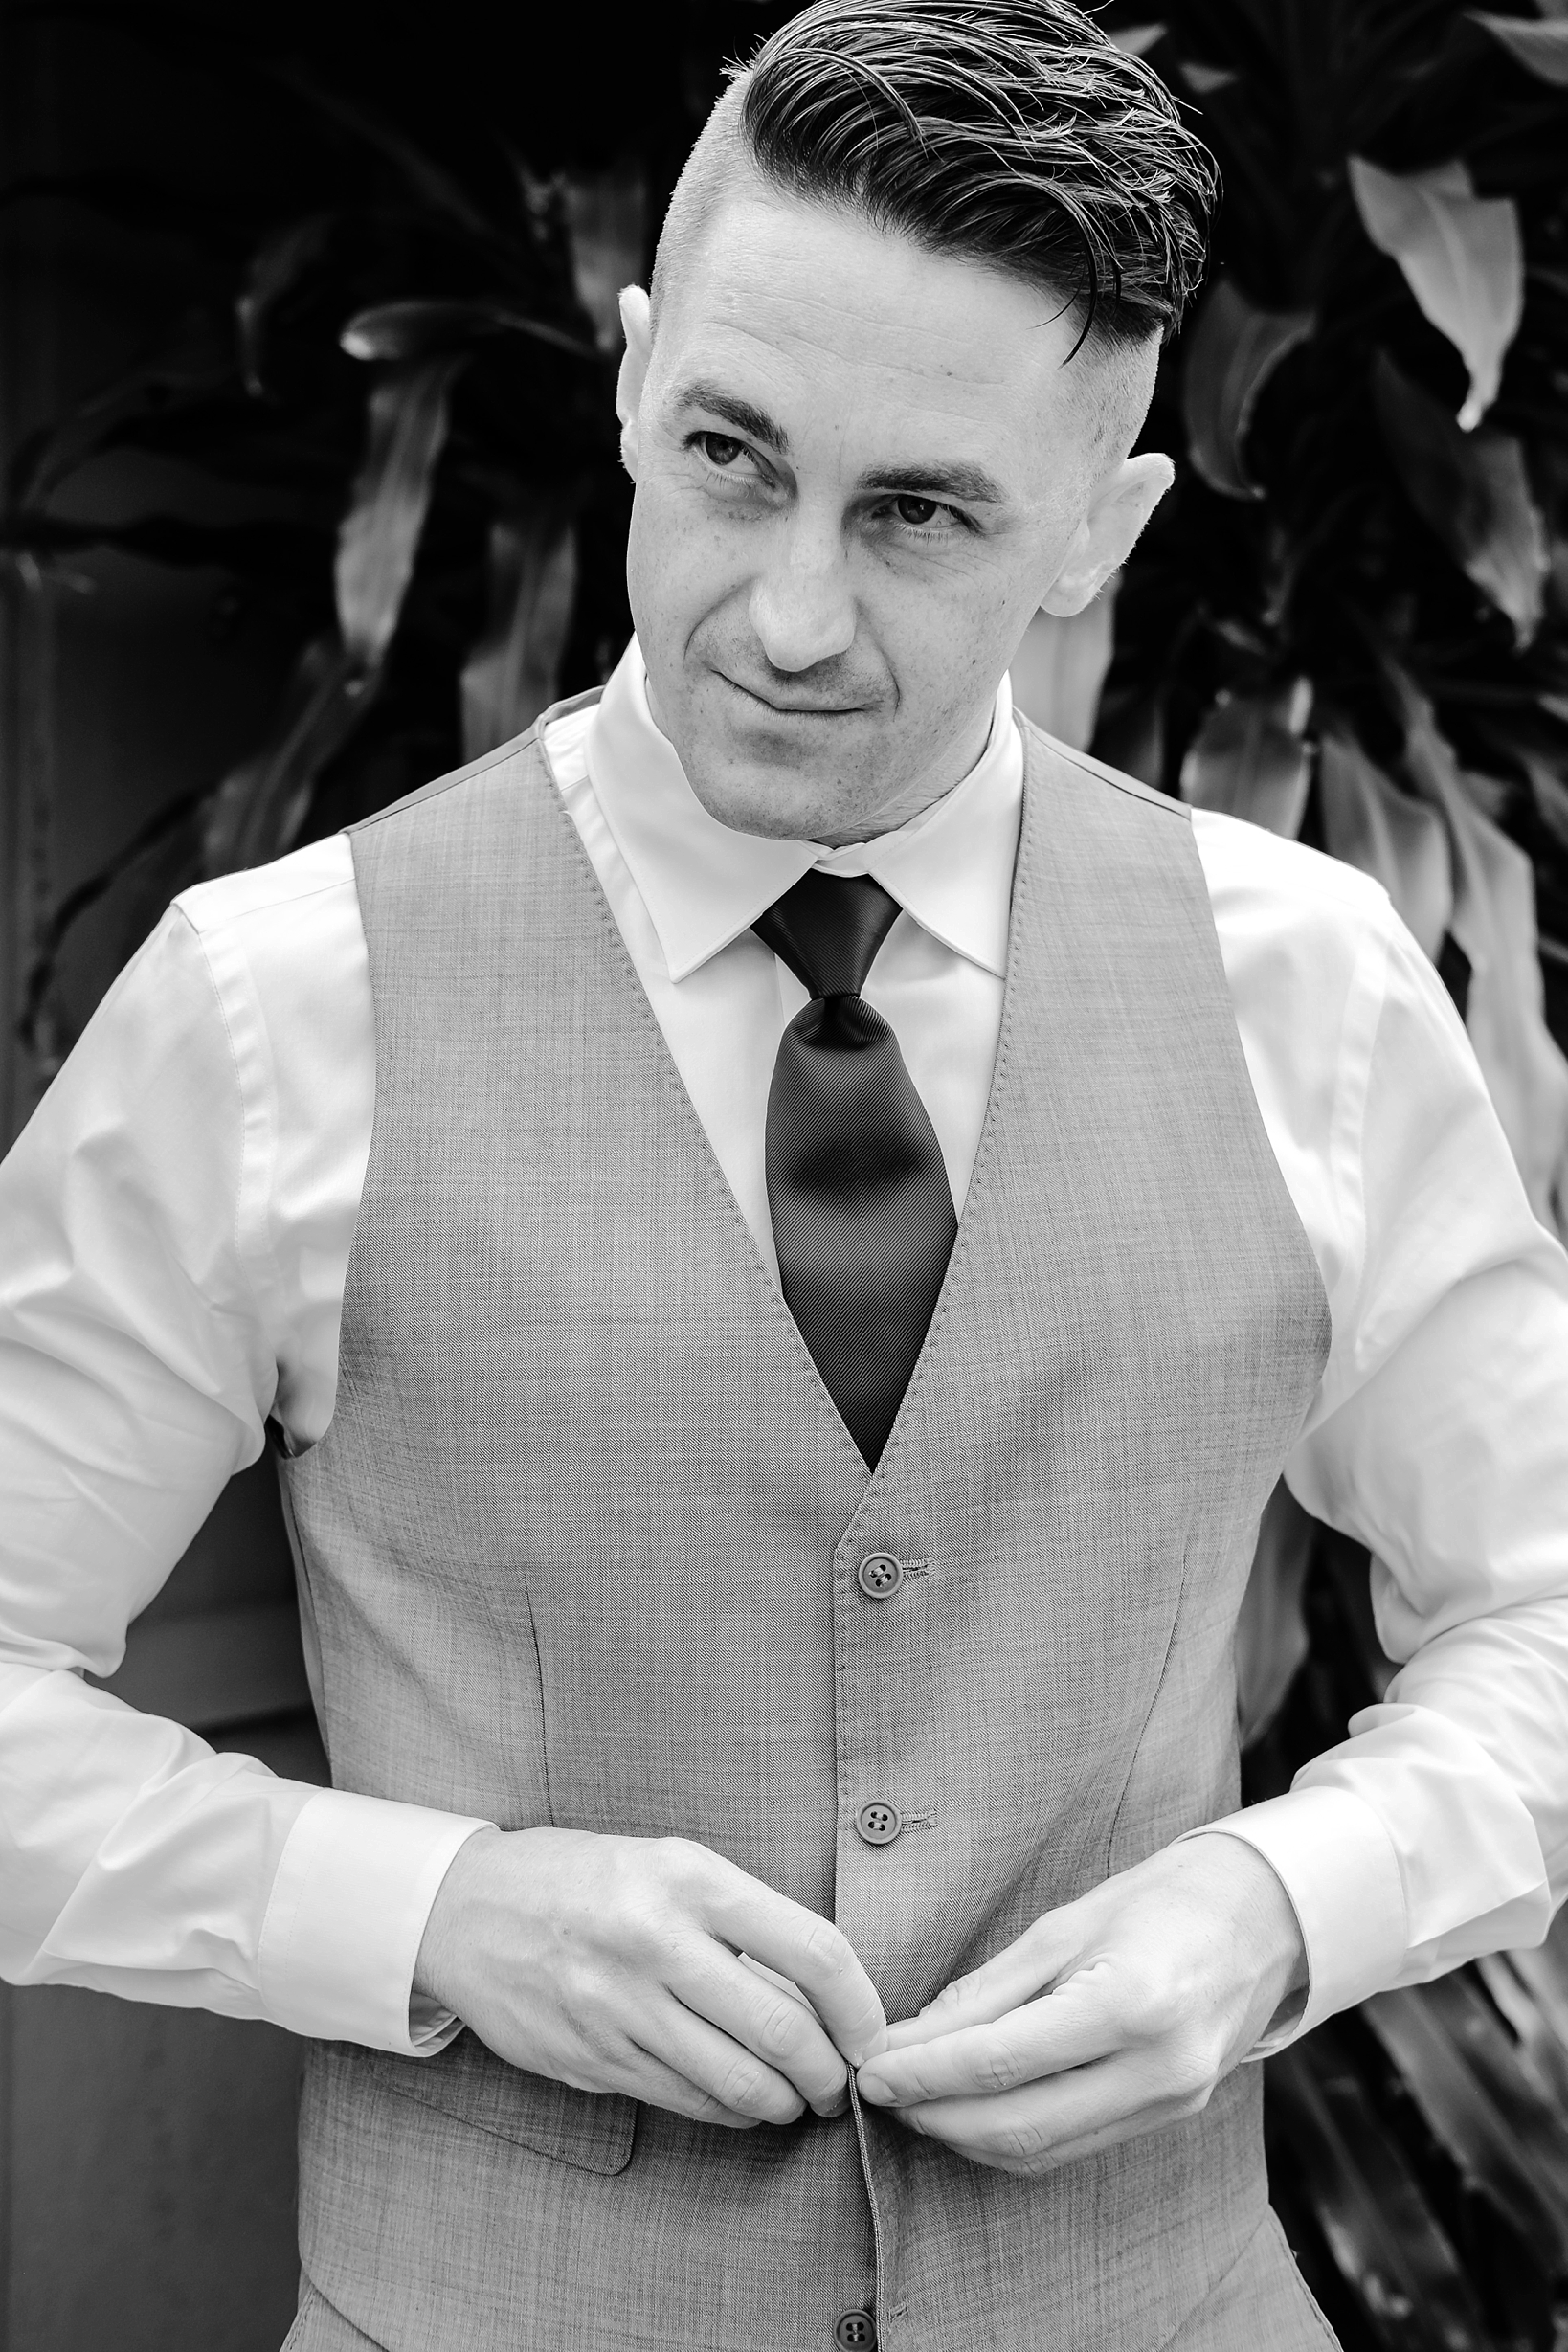 Groom putting his vest on in classic black and white